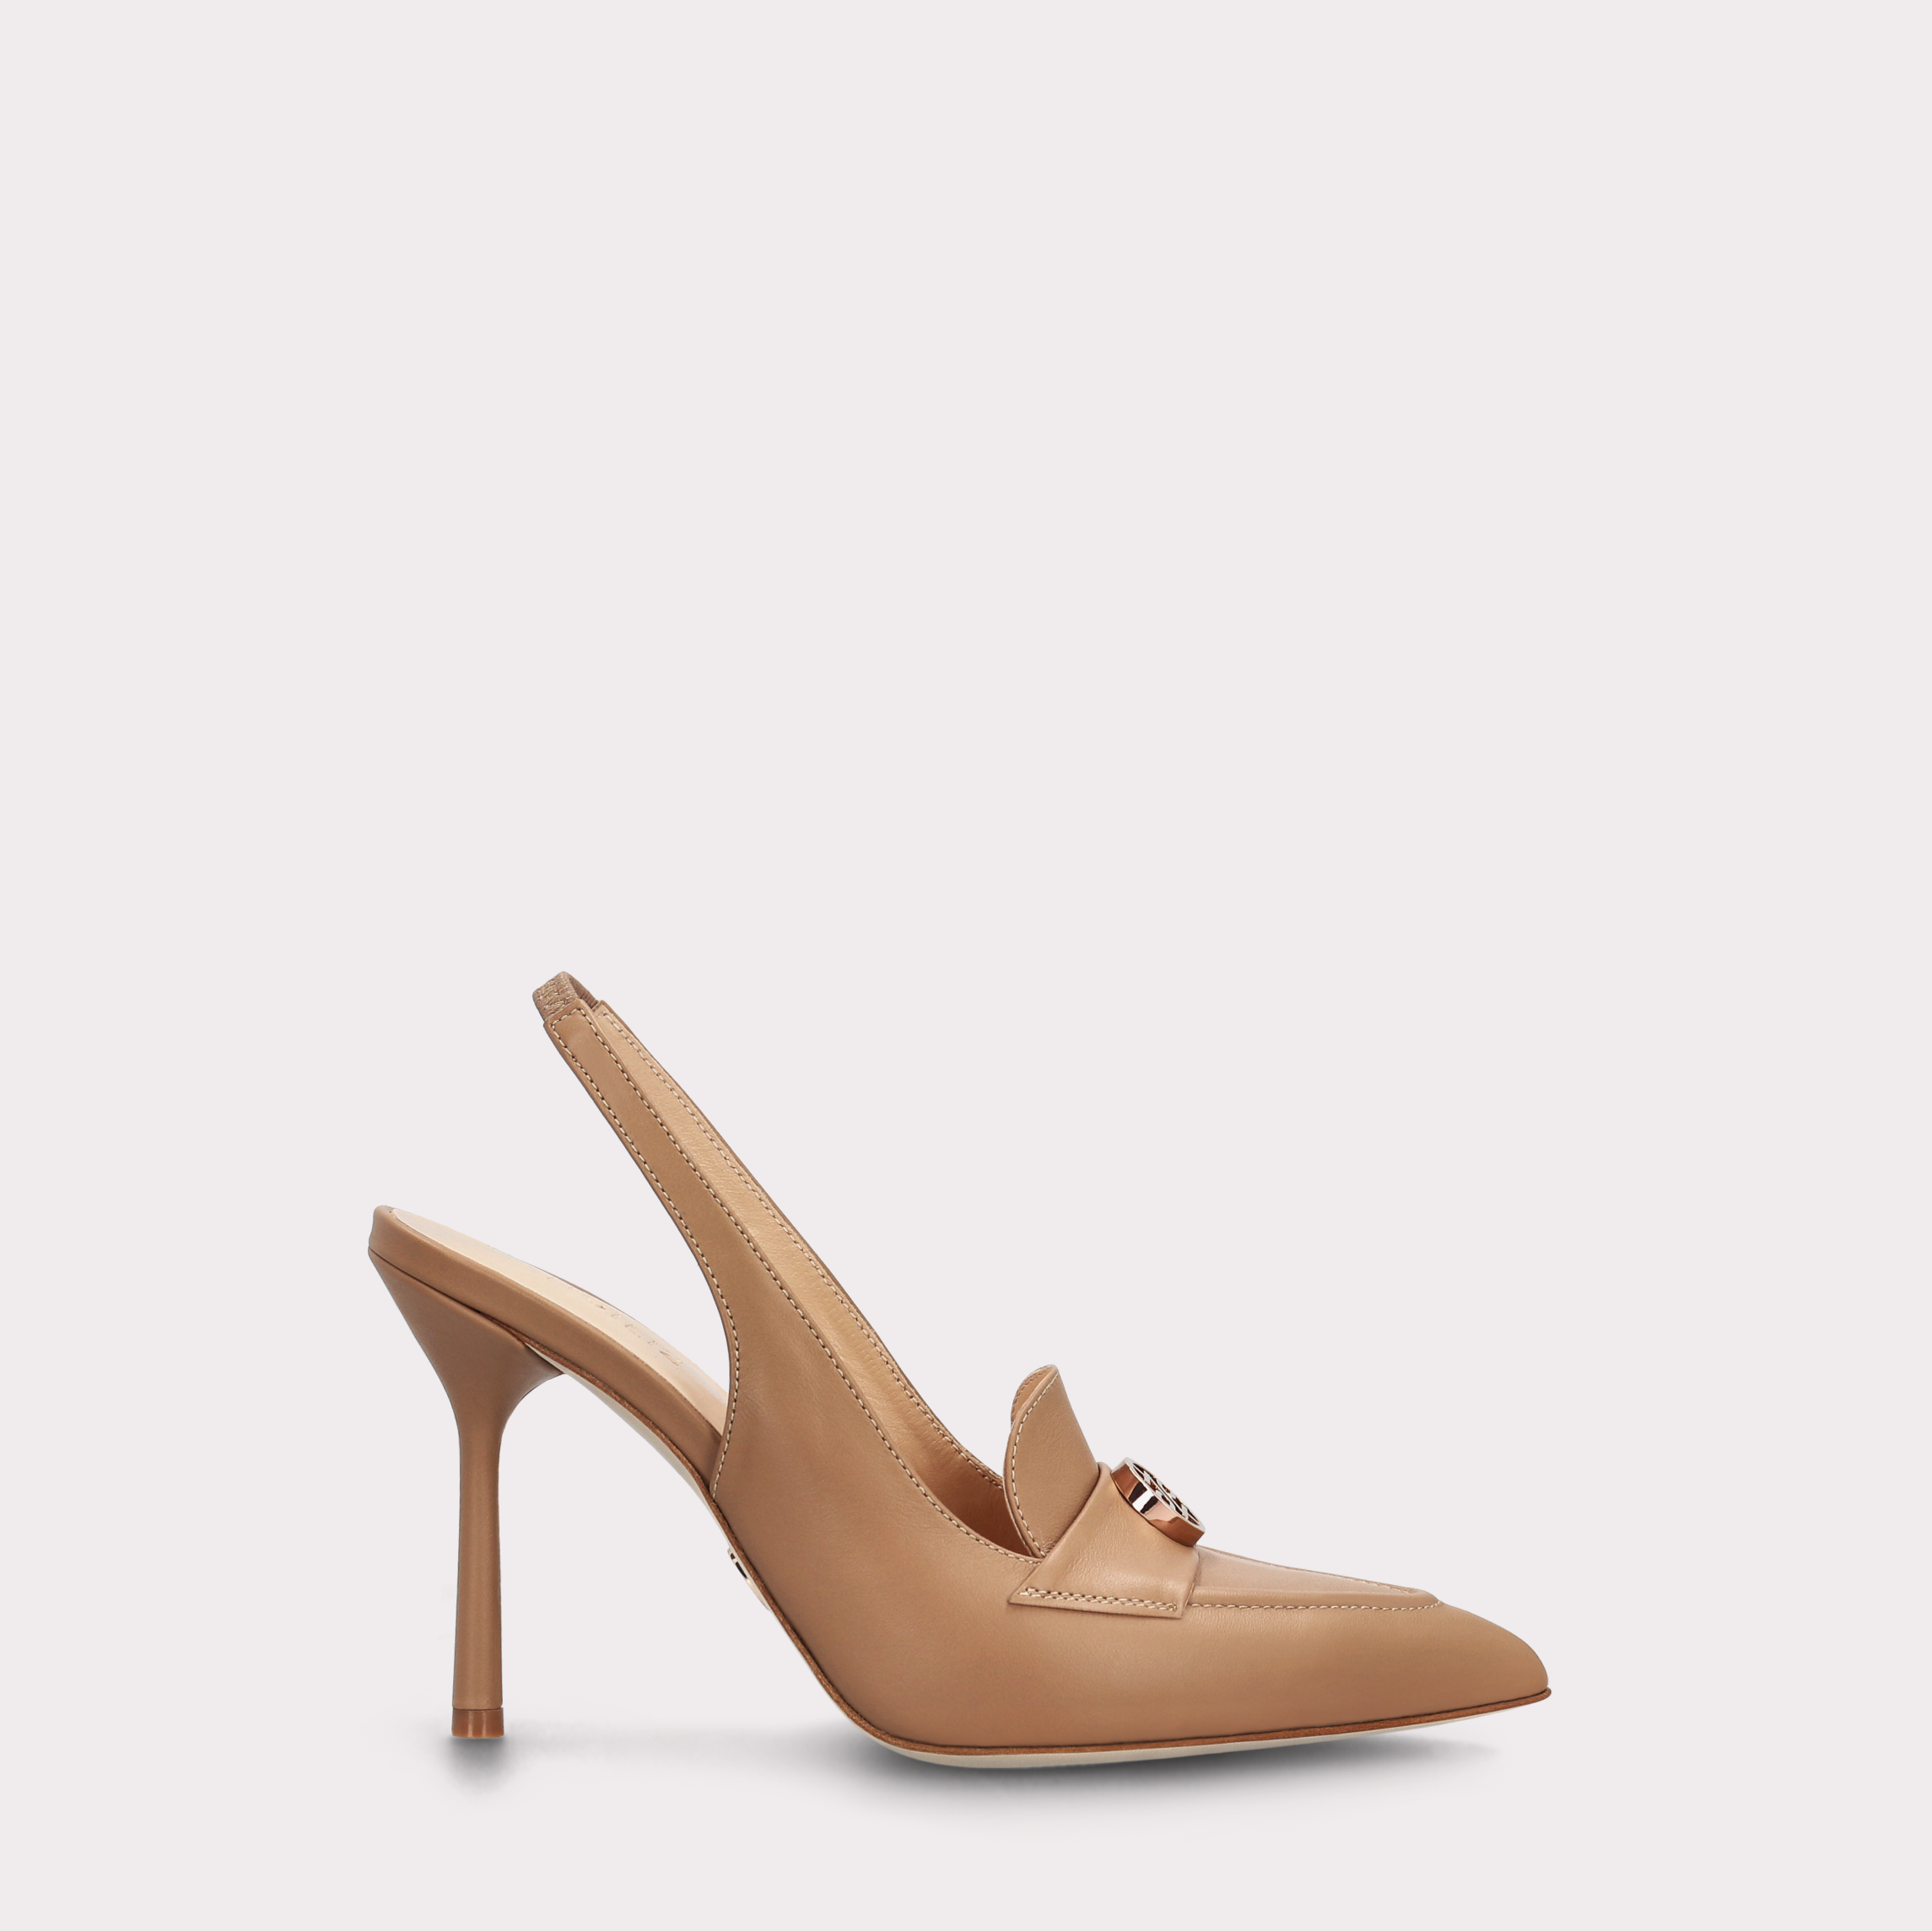 ABA 15 NUDE LEATHER PUMPS